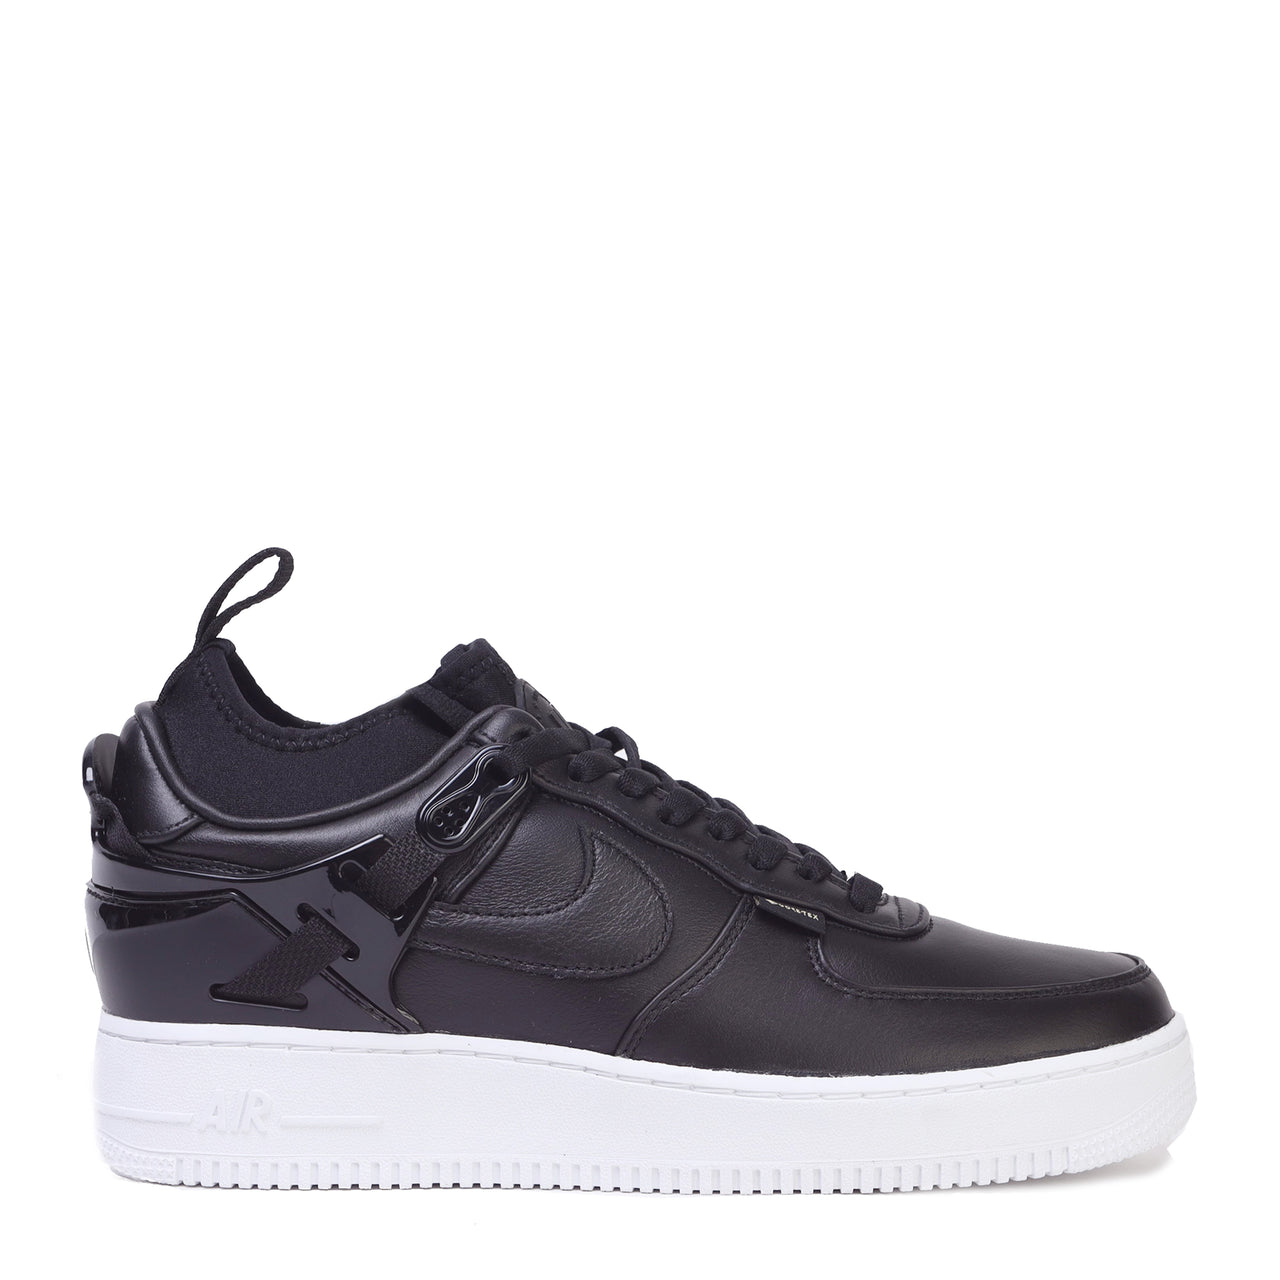 Nike Black Air Force 1 Rebel Xx Premium Leather Sneakers, Lace-up